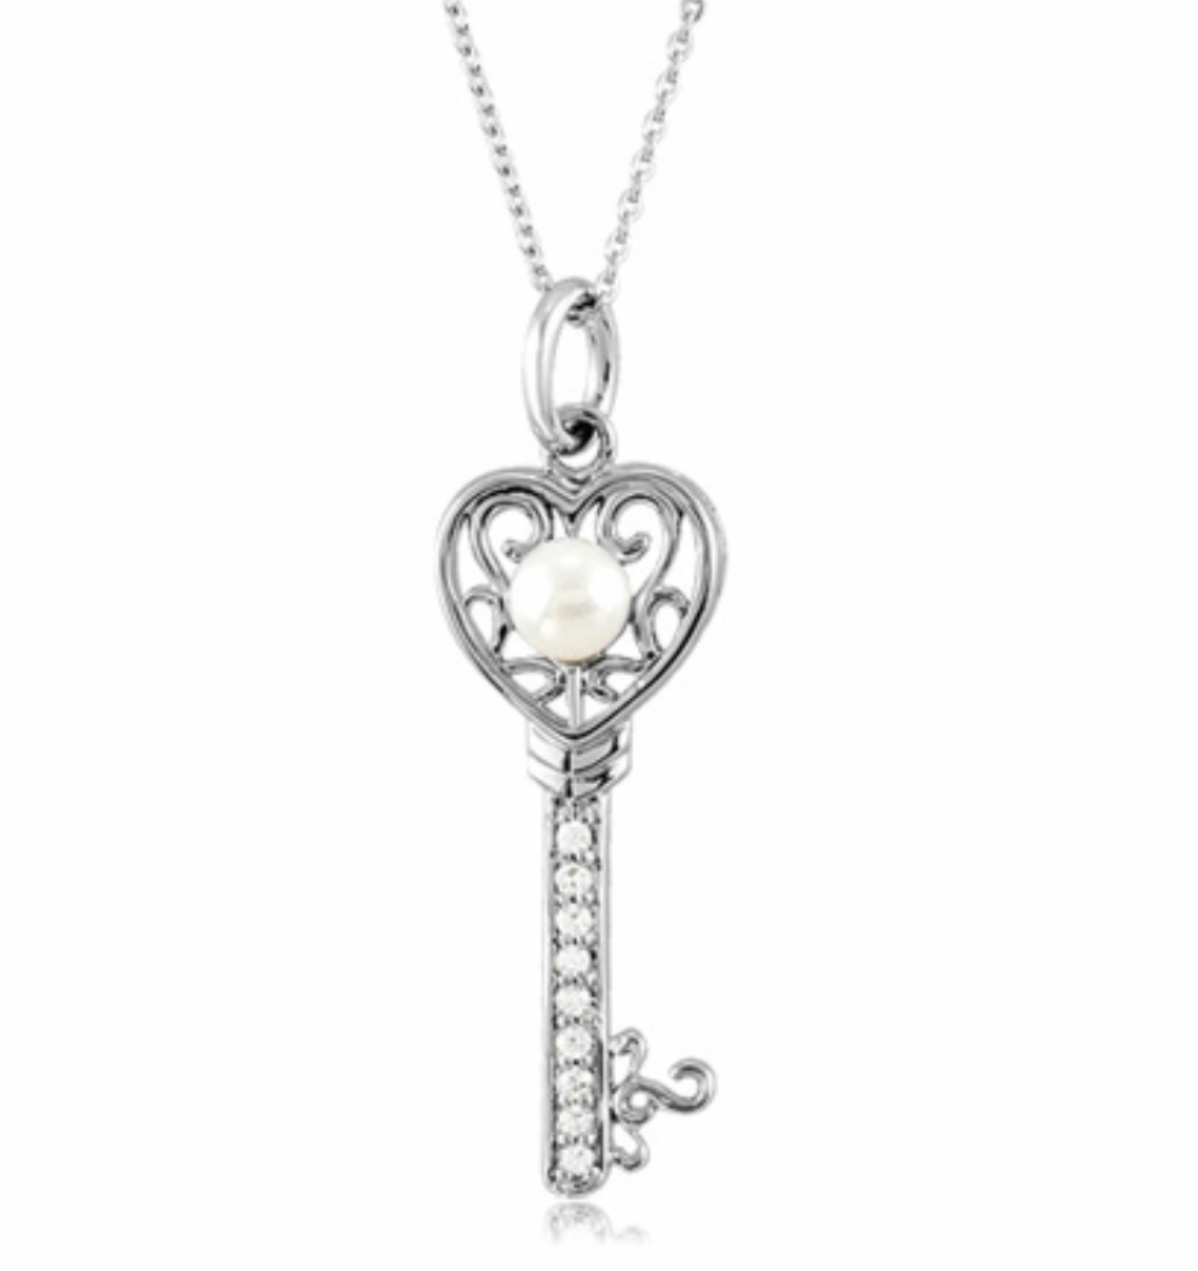 Pave CZ 'Key to Kindness' Rhodium Plate Sterling Silver Pendant Necklace.